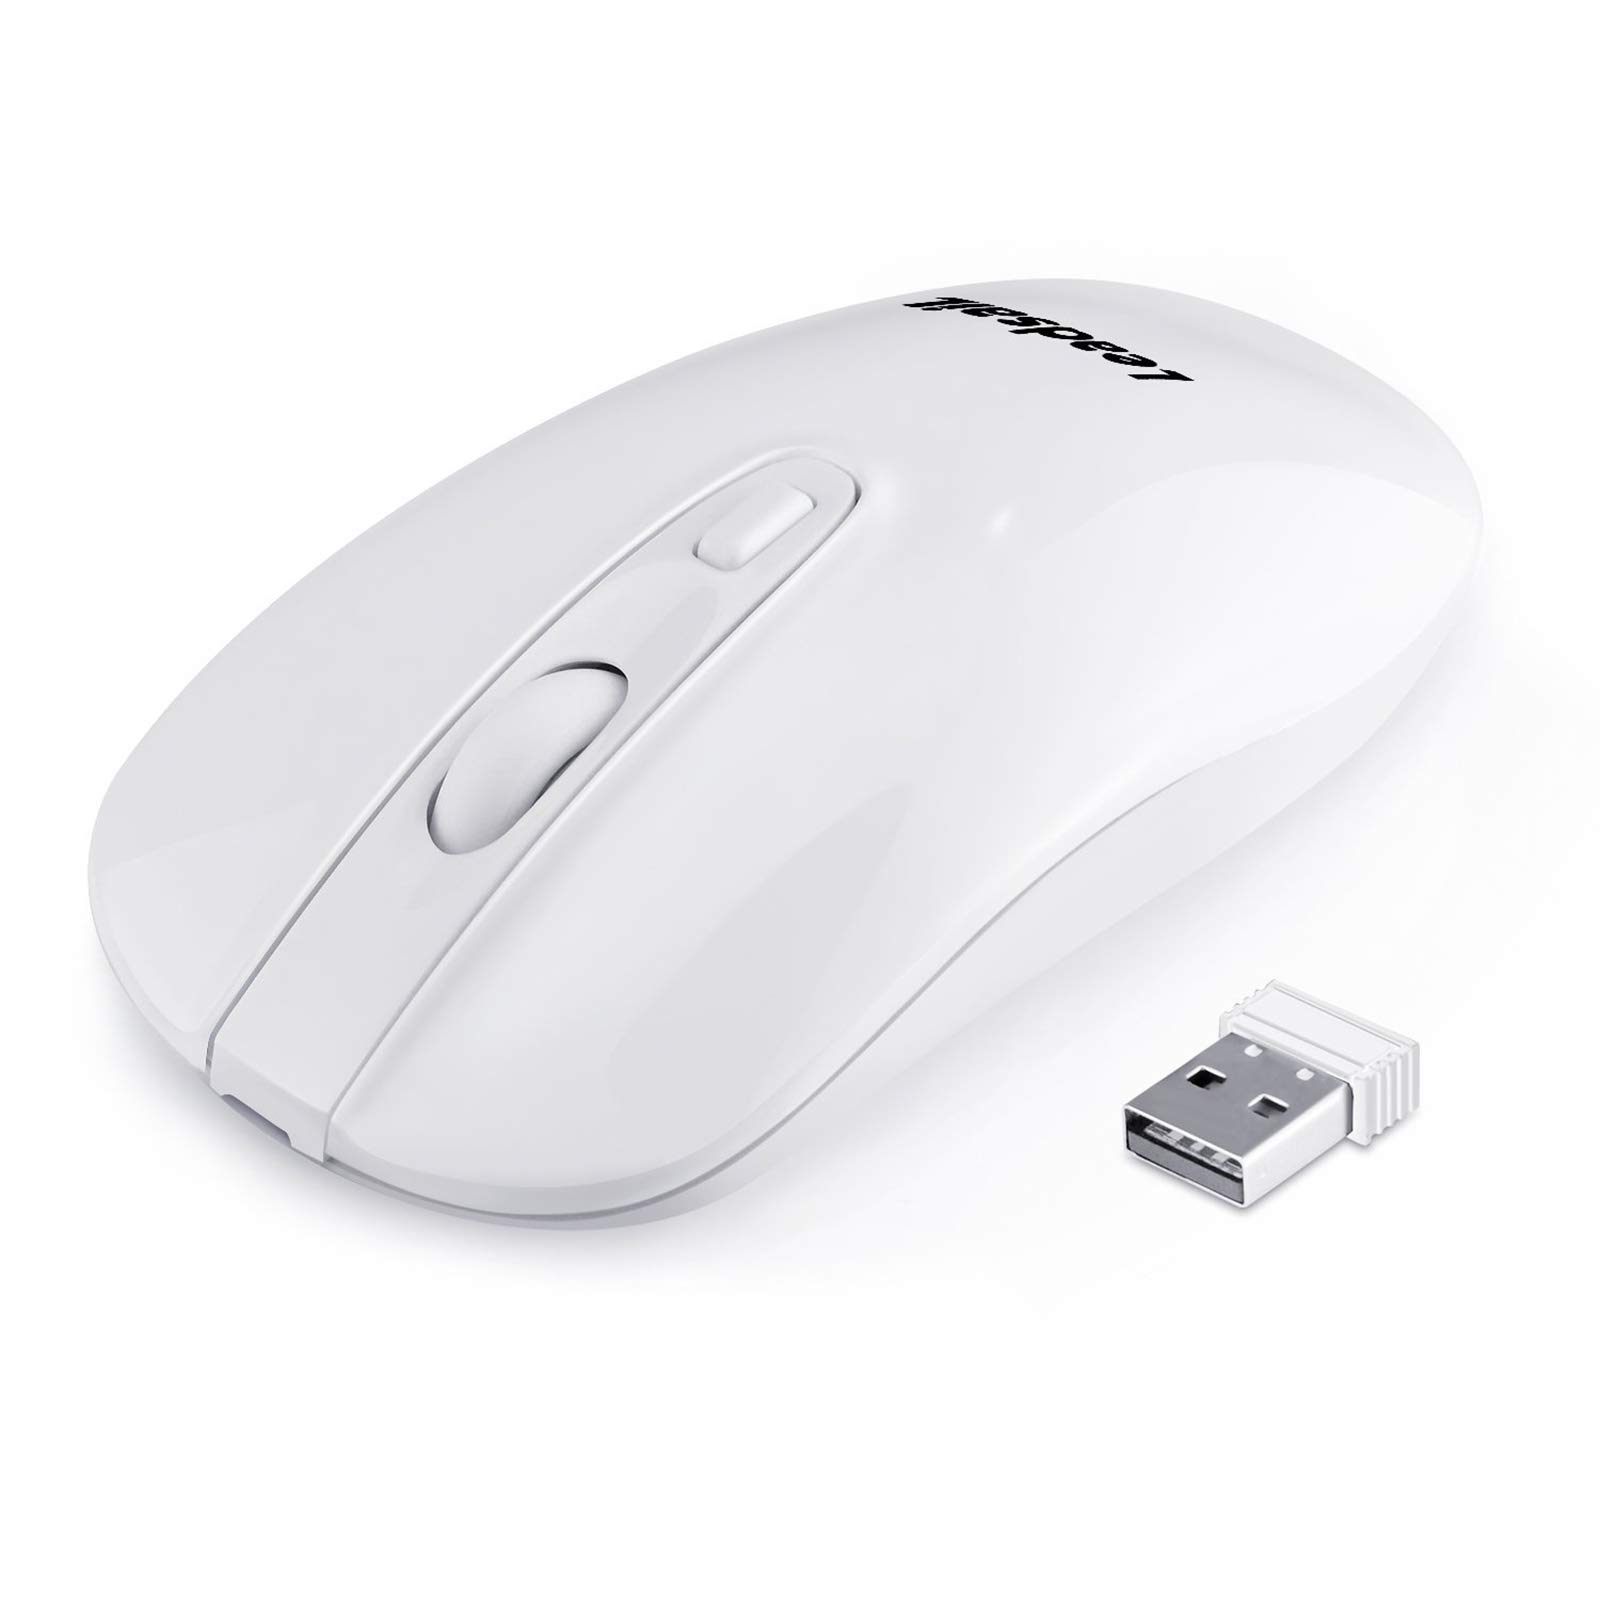 LeadsaiL Rechargeable Wireless Computer Mouse, 2.4G Portable Slim Cordless Mouse Less Noise for Laptop Optical Mouse with 5 Adjustable DPI Levels USB Mouse for Laptop, De - $3.24